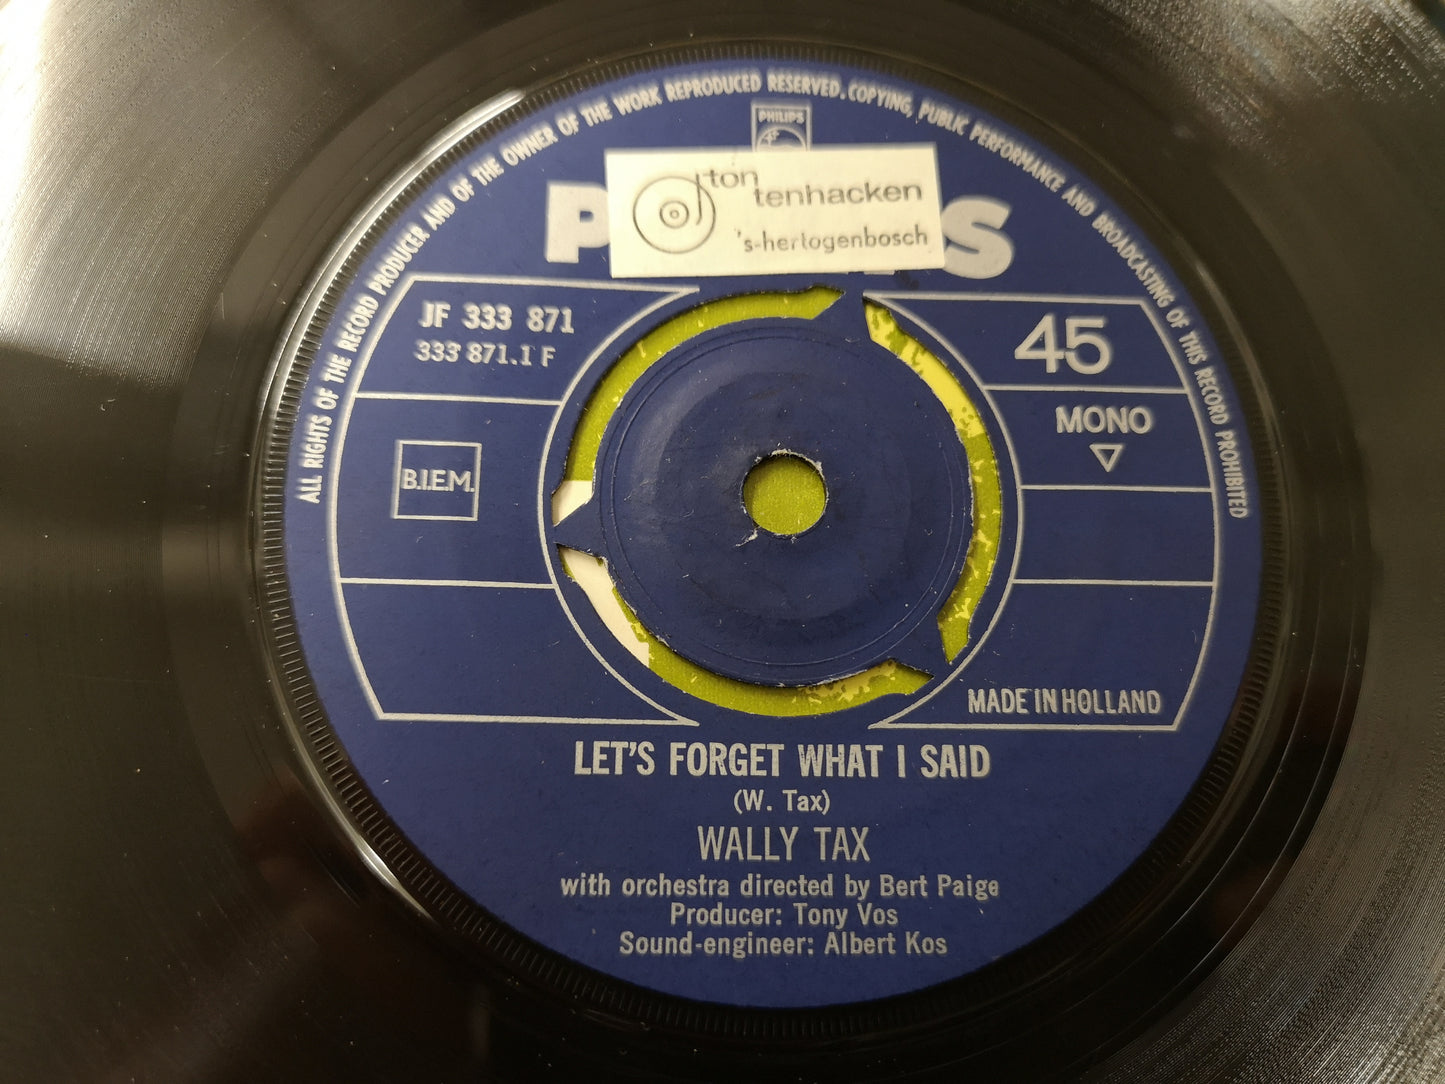 Wally Tax "Let's Forget What I Said" Orig Holland 1967 VG++/VG++ (7" Single)